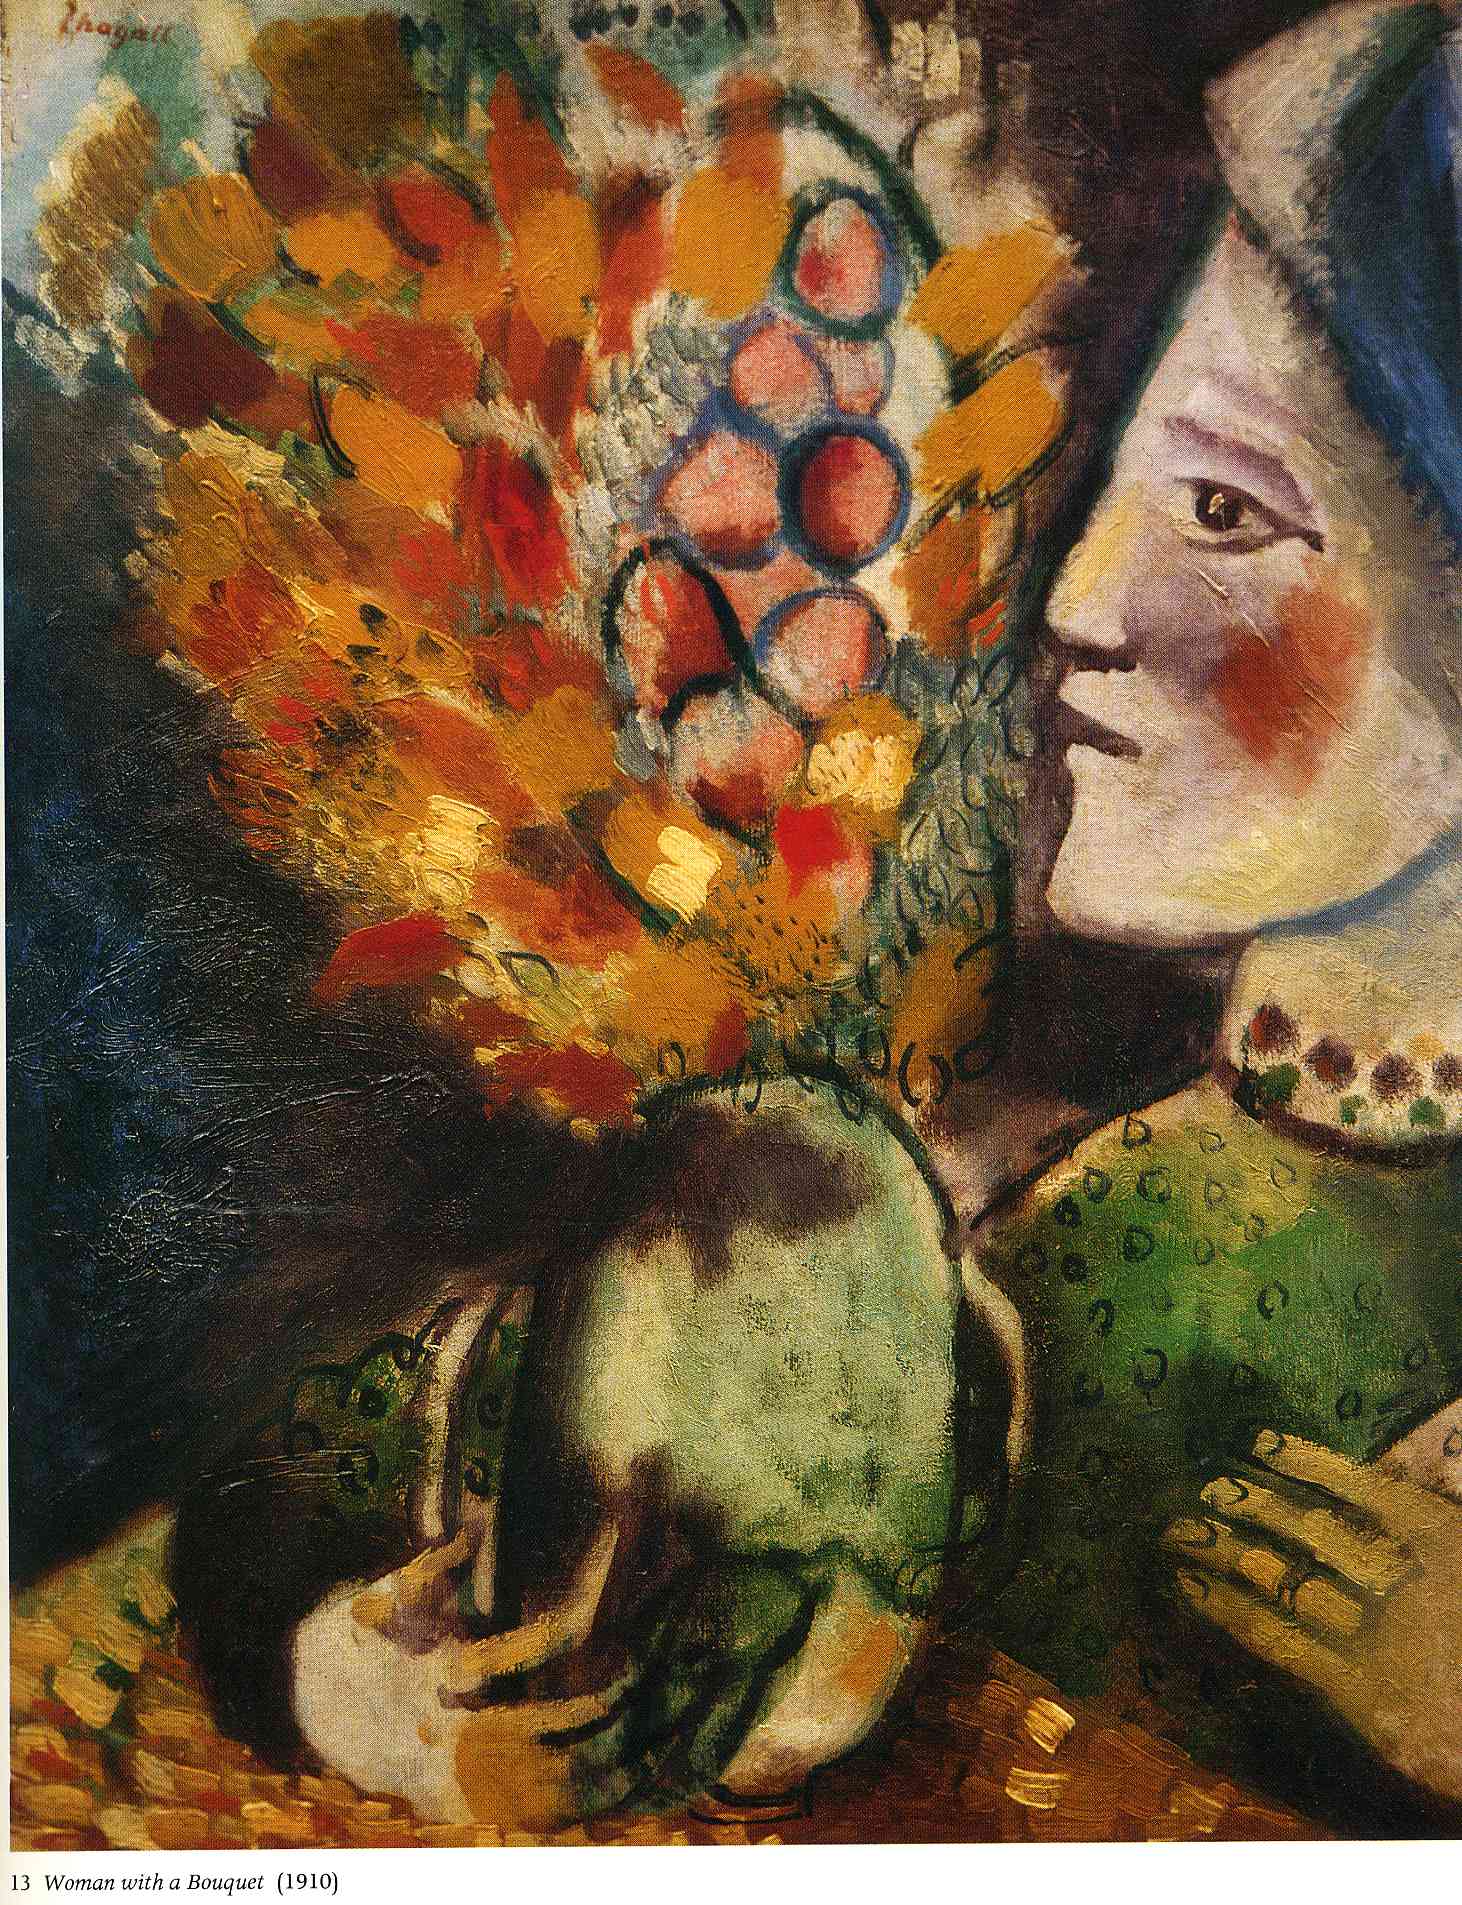 Woman with a Bouquet (1910).